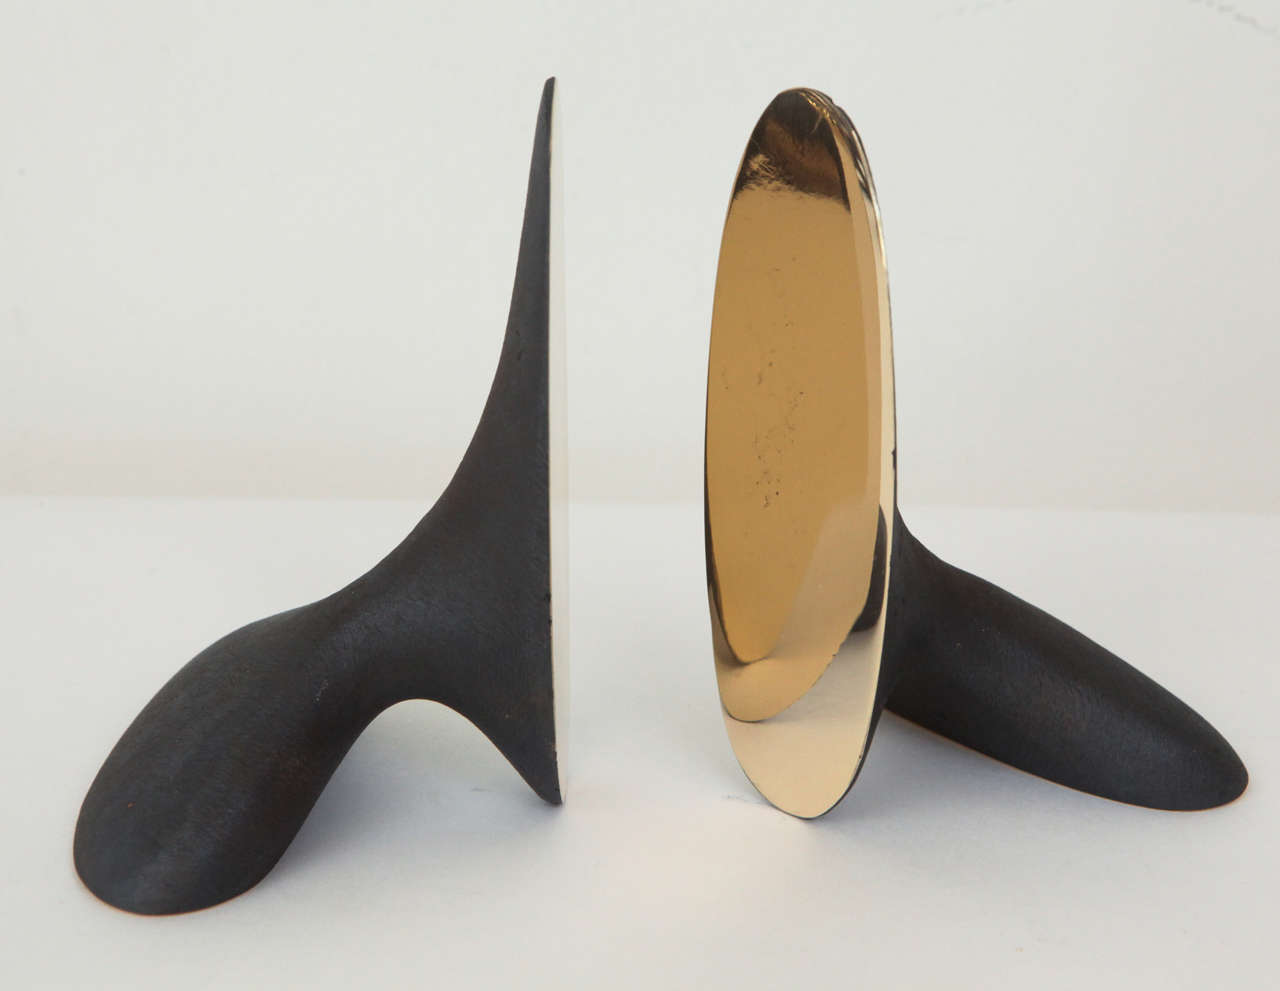 20th Century Assortment of Solid Brass Bookends by Carl Aubock